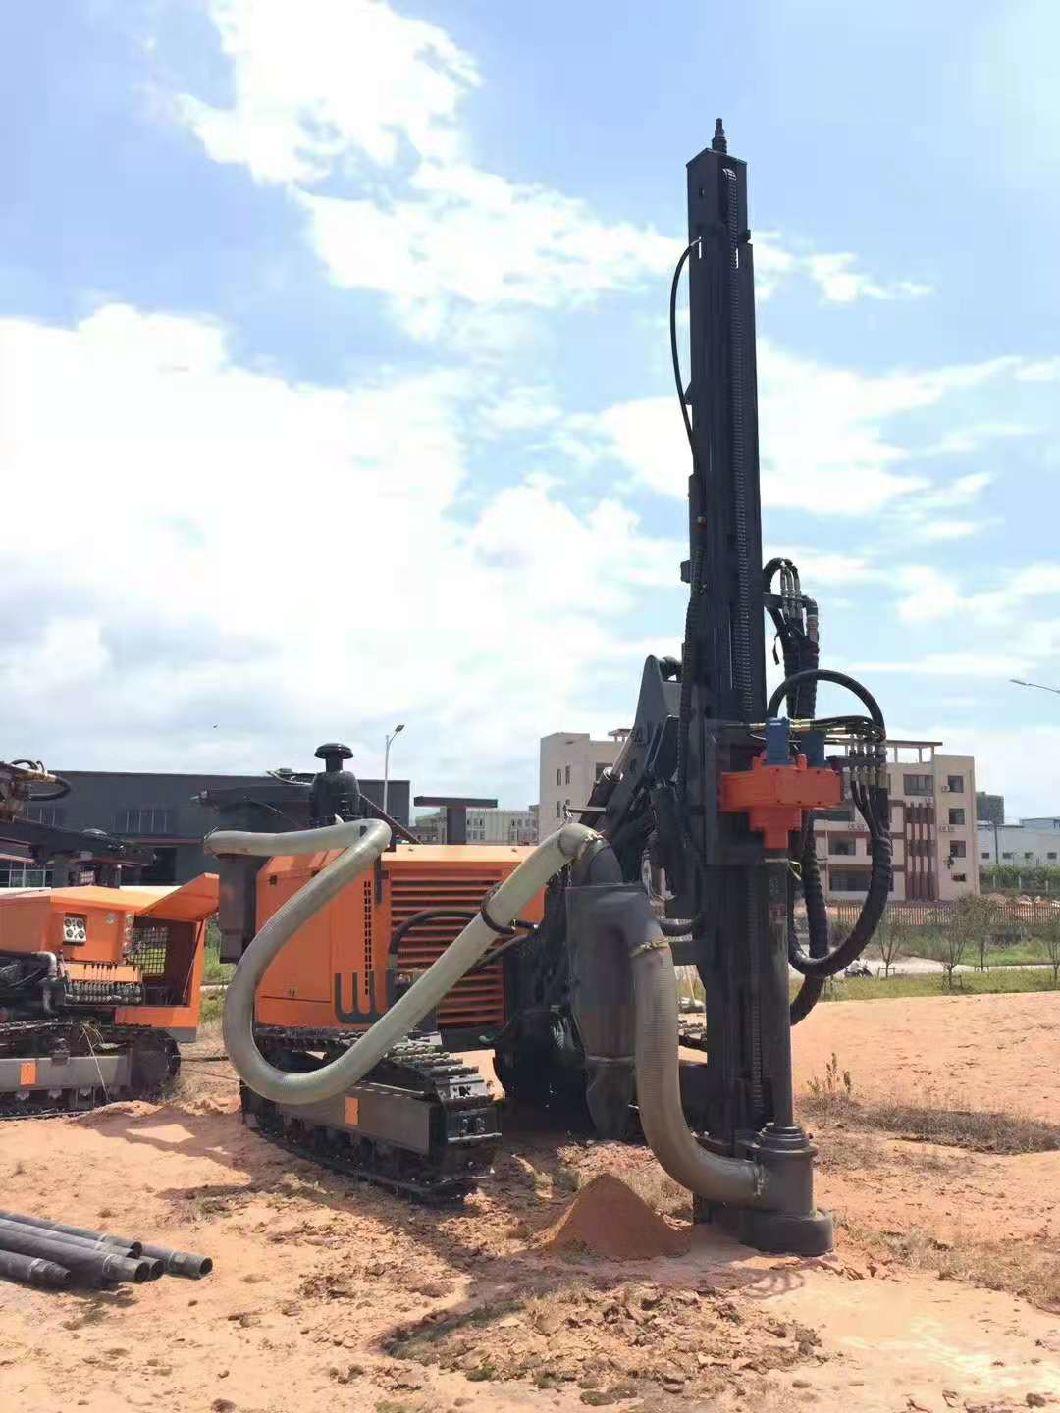 Cheap Price Crawler Mounted DTH Drilling Rig 200m Diesel Engine Water Well Drilling Rig Borehole Machinery Drilling Wells